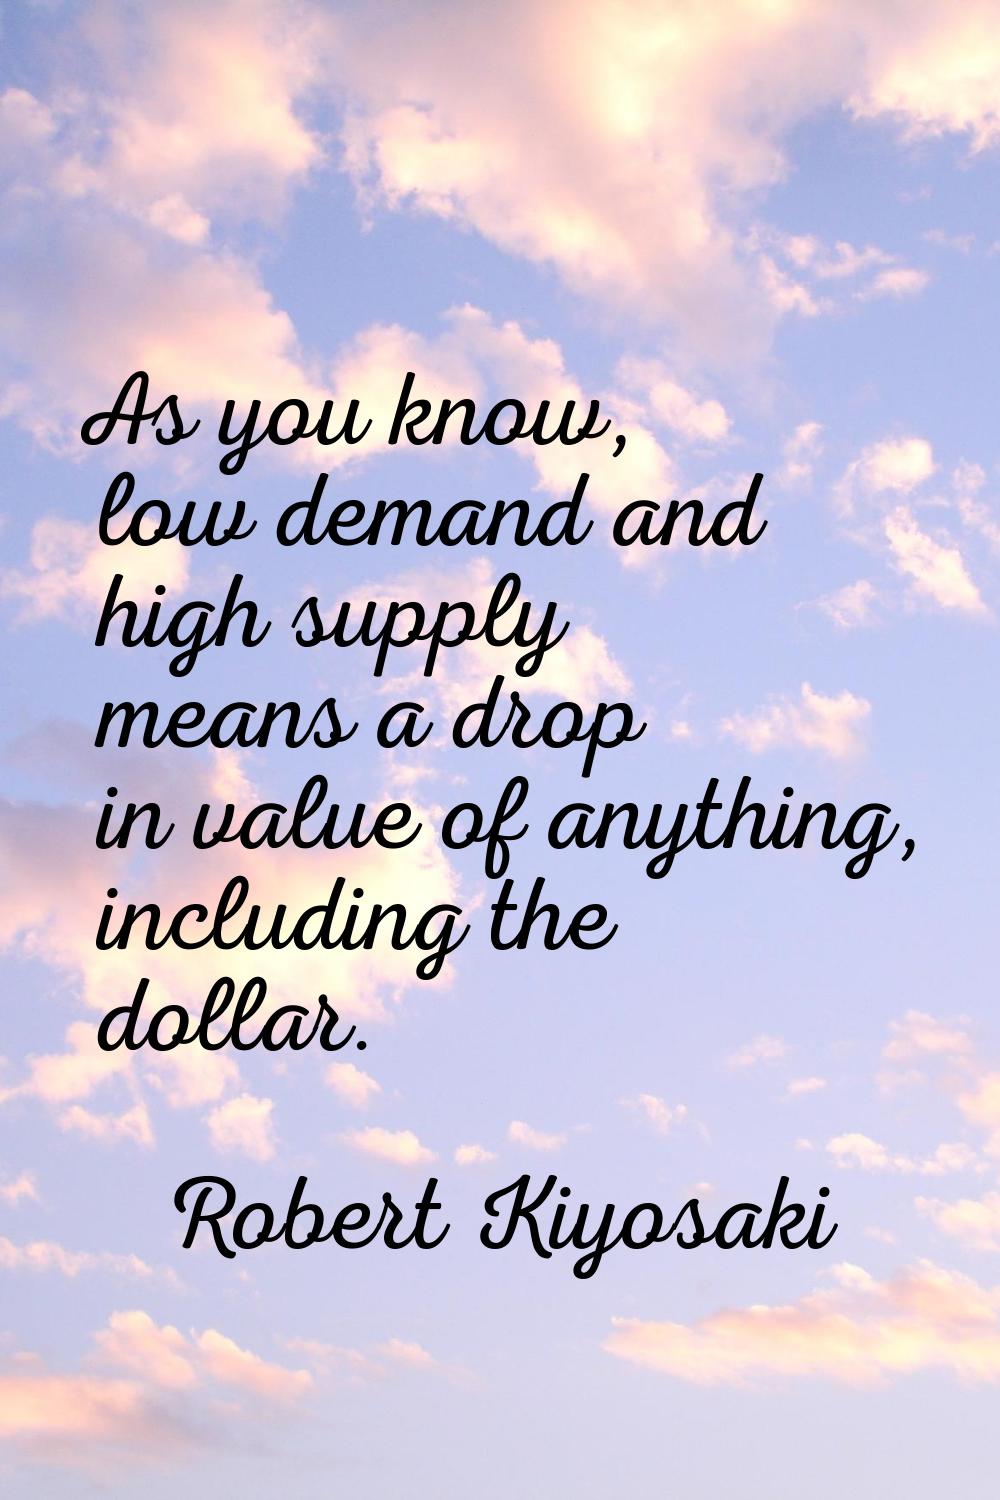 As you know, low demand and high supply means a drop in value of anything, including the dollar.